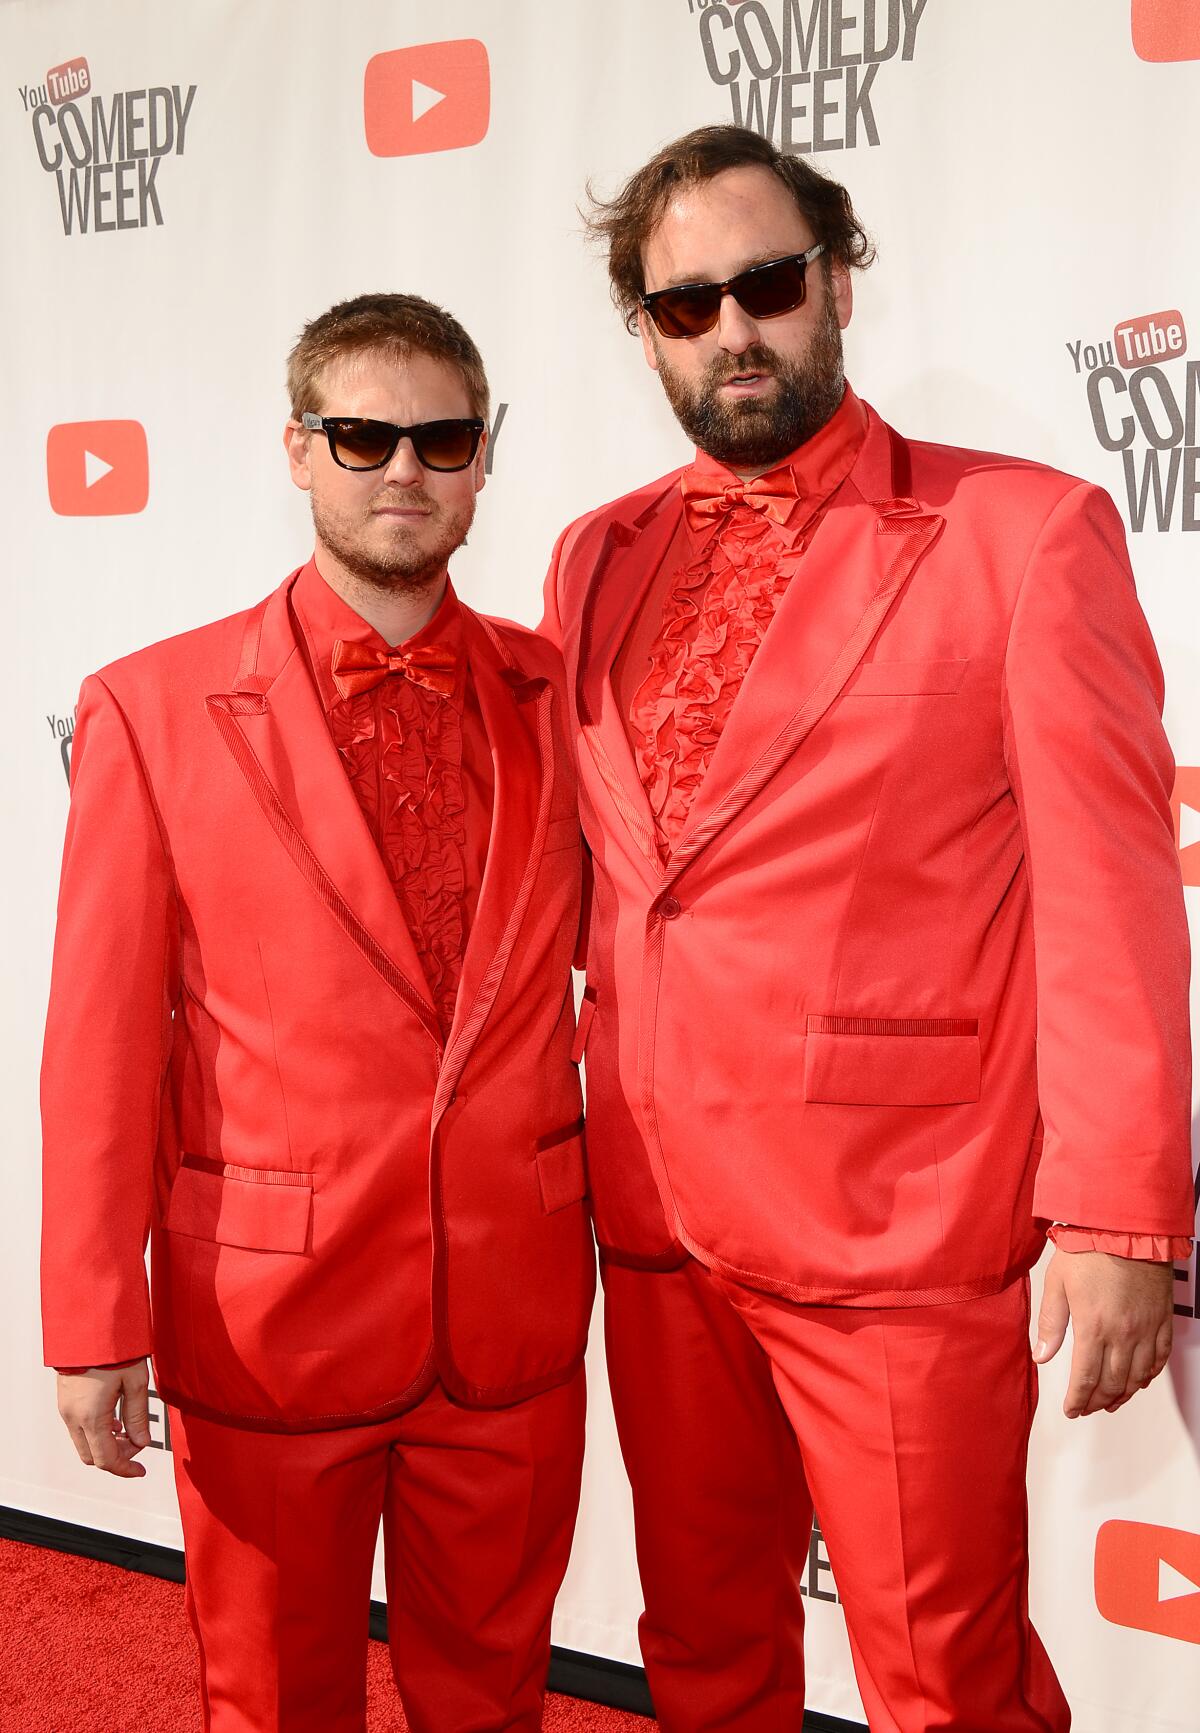 Eric Wareheim (left) and Tim Heidecker of Tim & Eric attends "The Big Live Comedy Show" presented by YouTube Comedy Week held at Culver Studios on May 19, 2013 in Culver City, California.